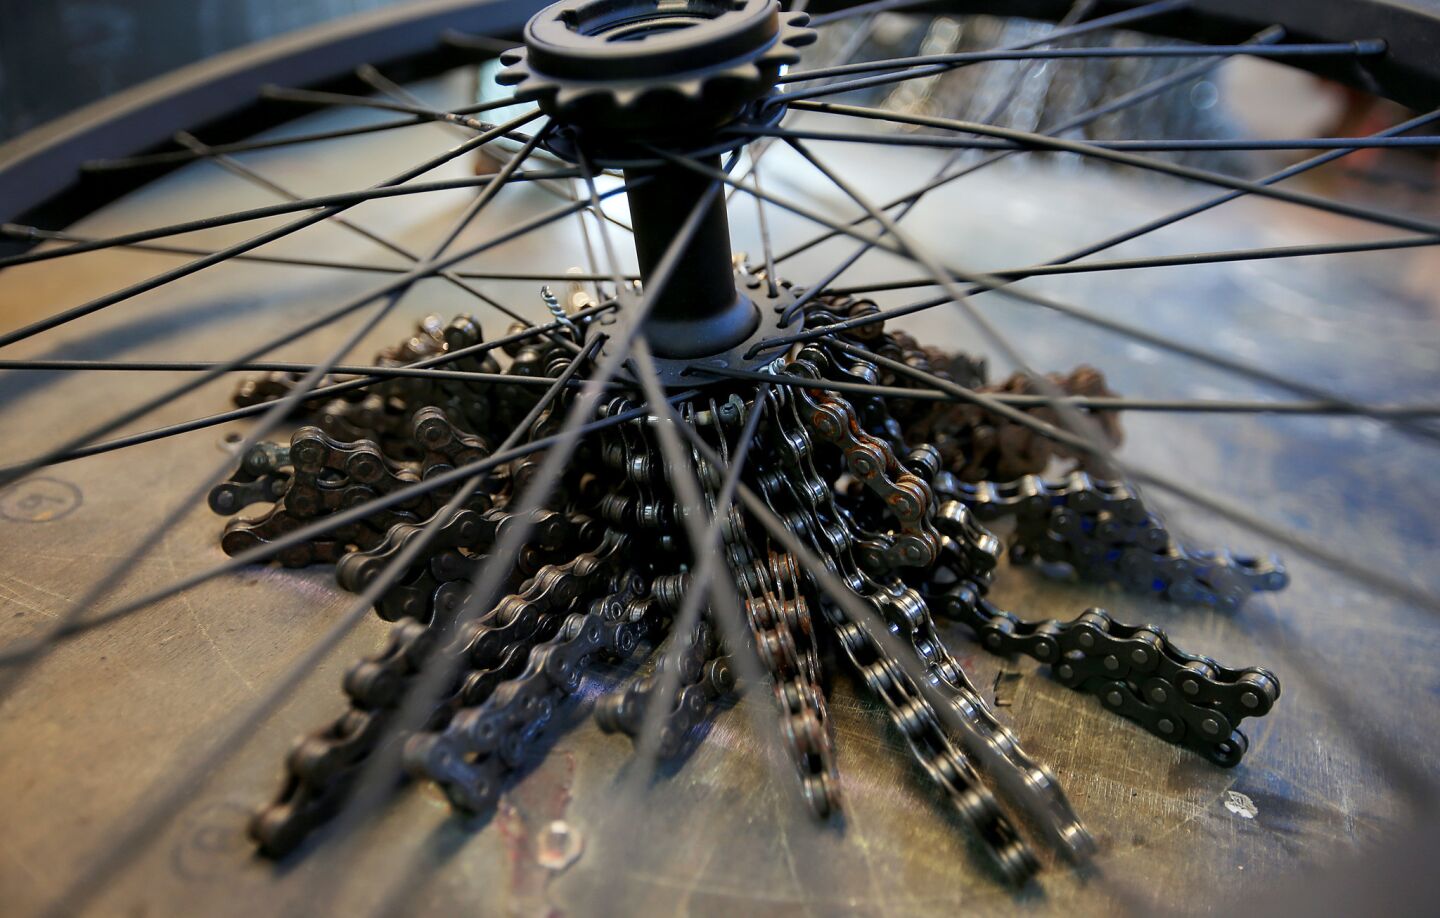 Shown is a closeup of some of the bicycle parts that artist Carolina Fontoura Alzaga uses to create chandeliers.